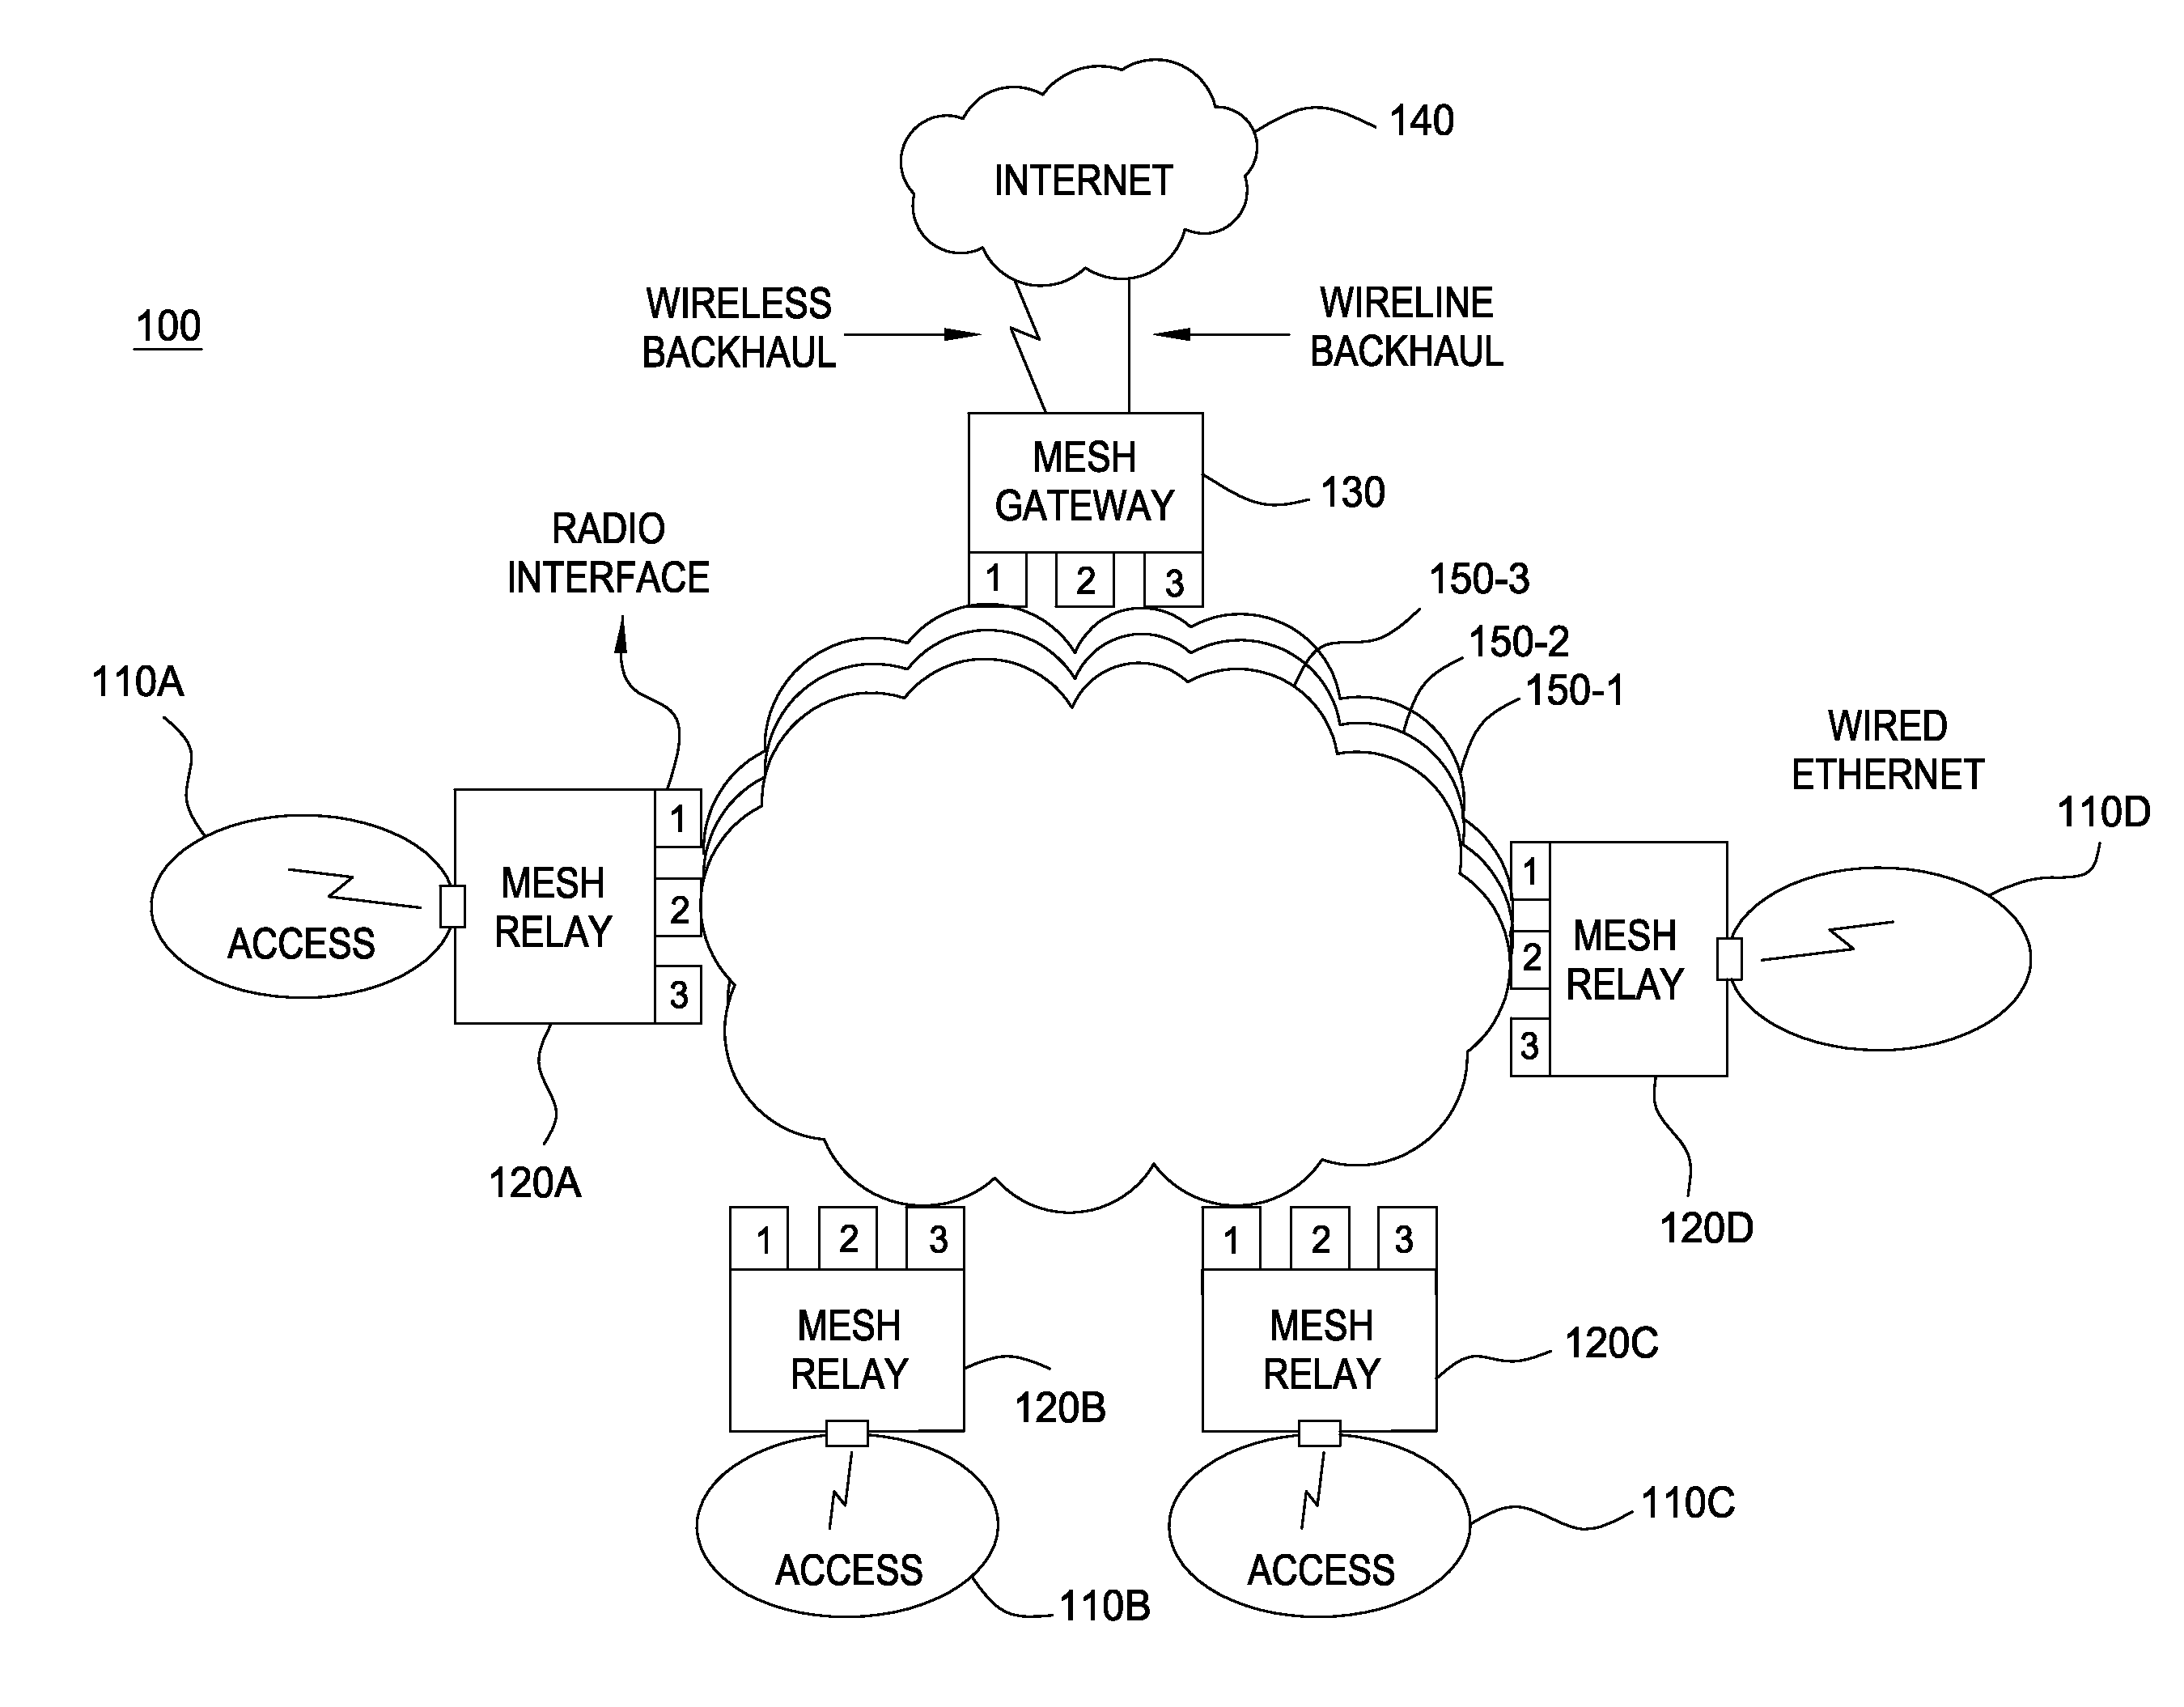 Interference aware routing in multi-radio wireless mesh networks